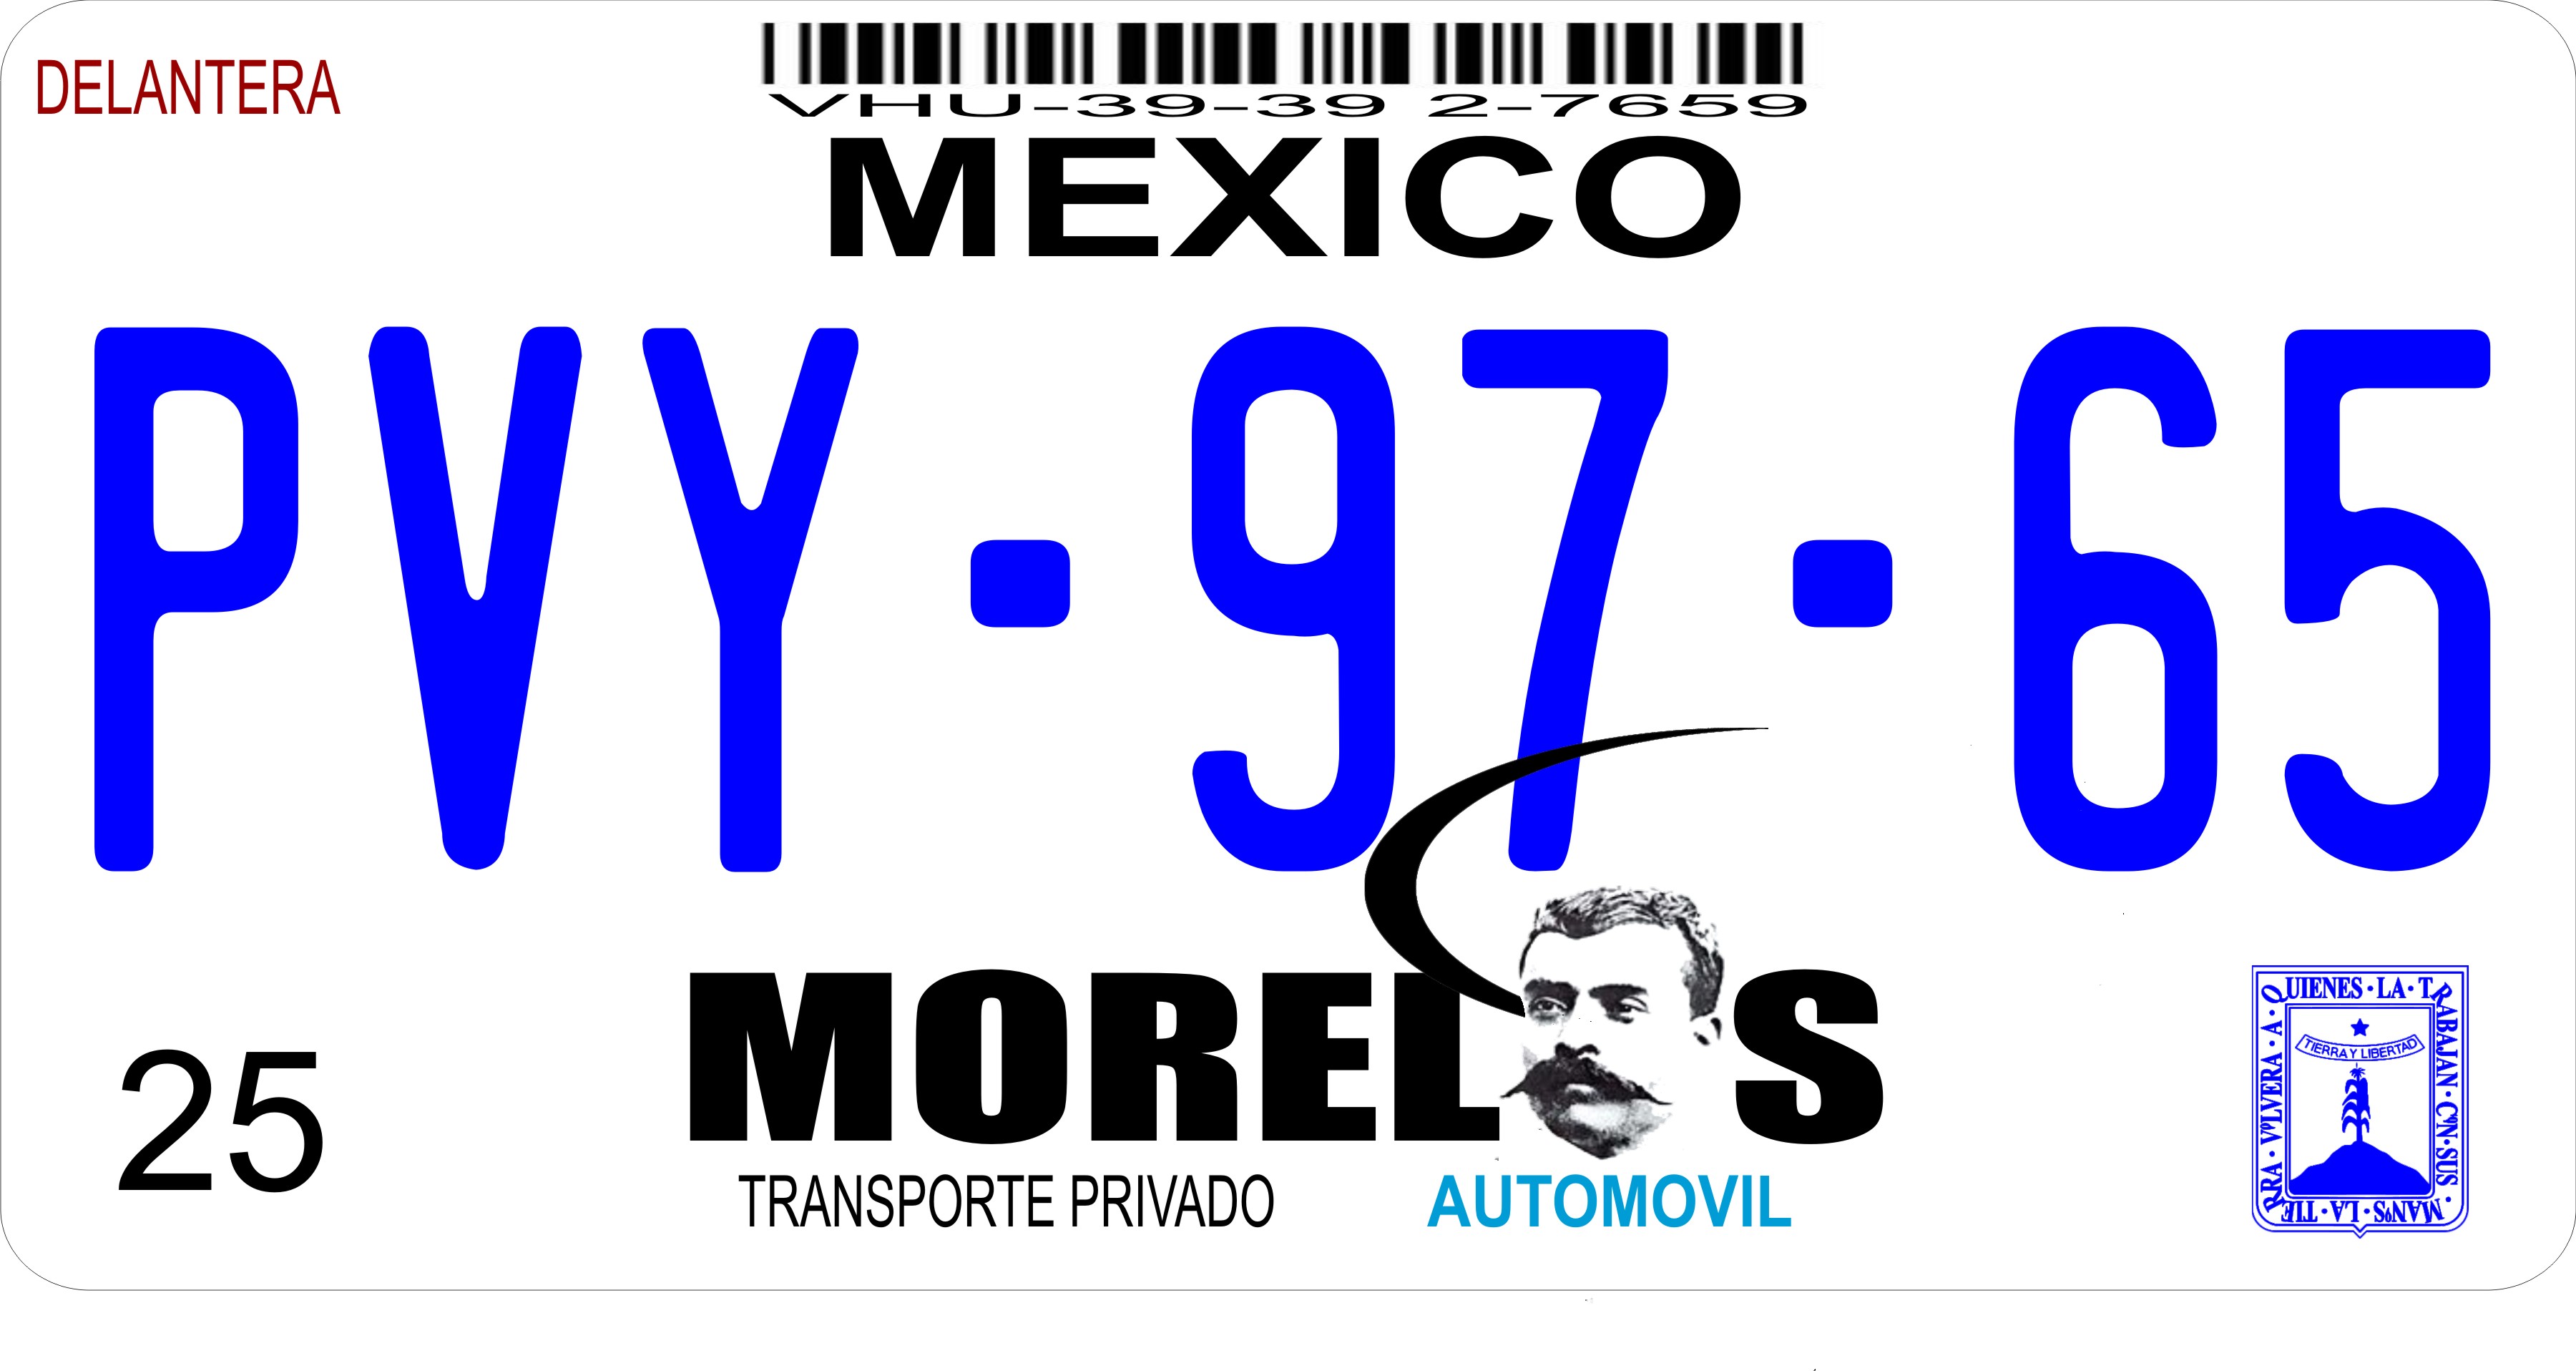 Mexico Morelos Photo LICENSE PLATE  Free Personalization on this PLATE